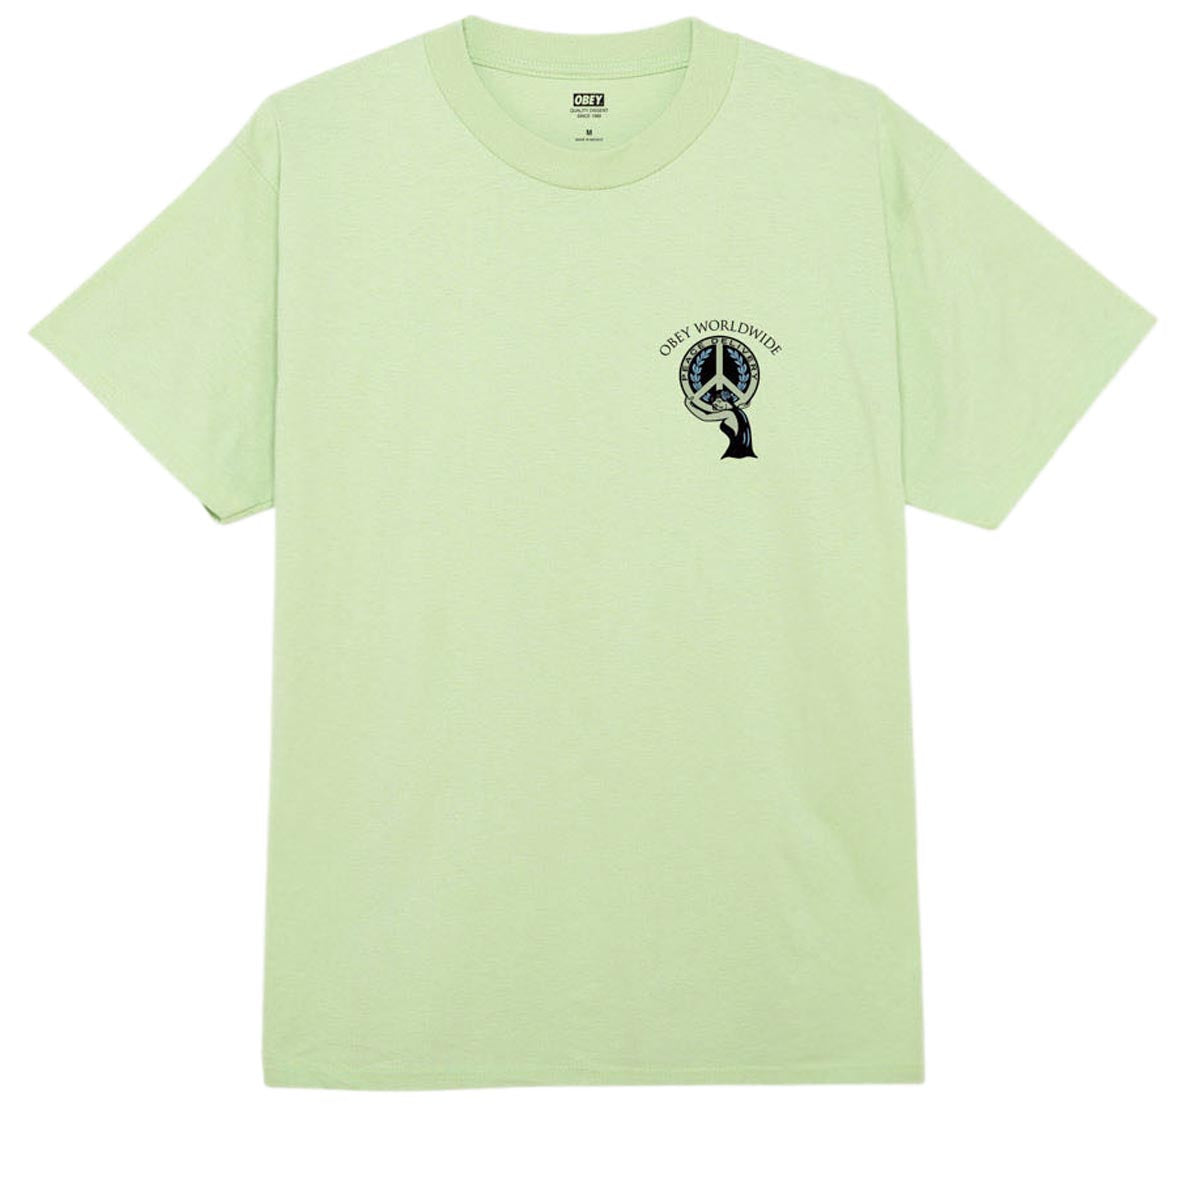 Obey Peace Delivery T-Shirt - Cucumber image 2